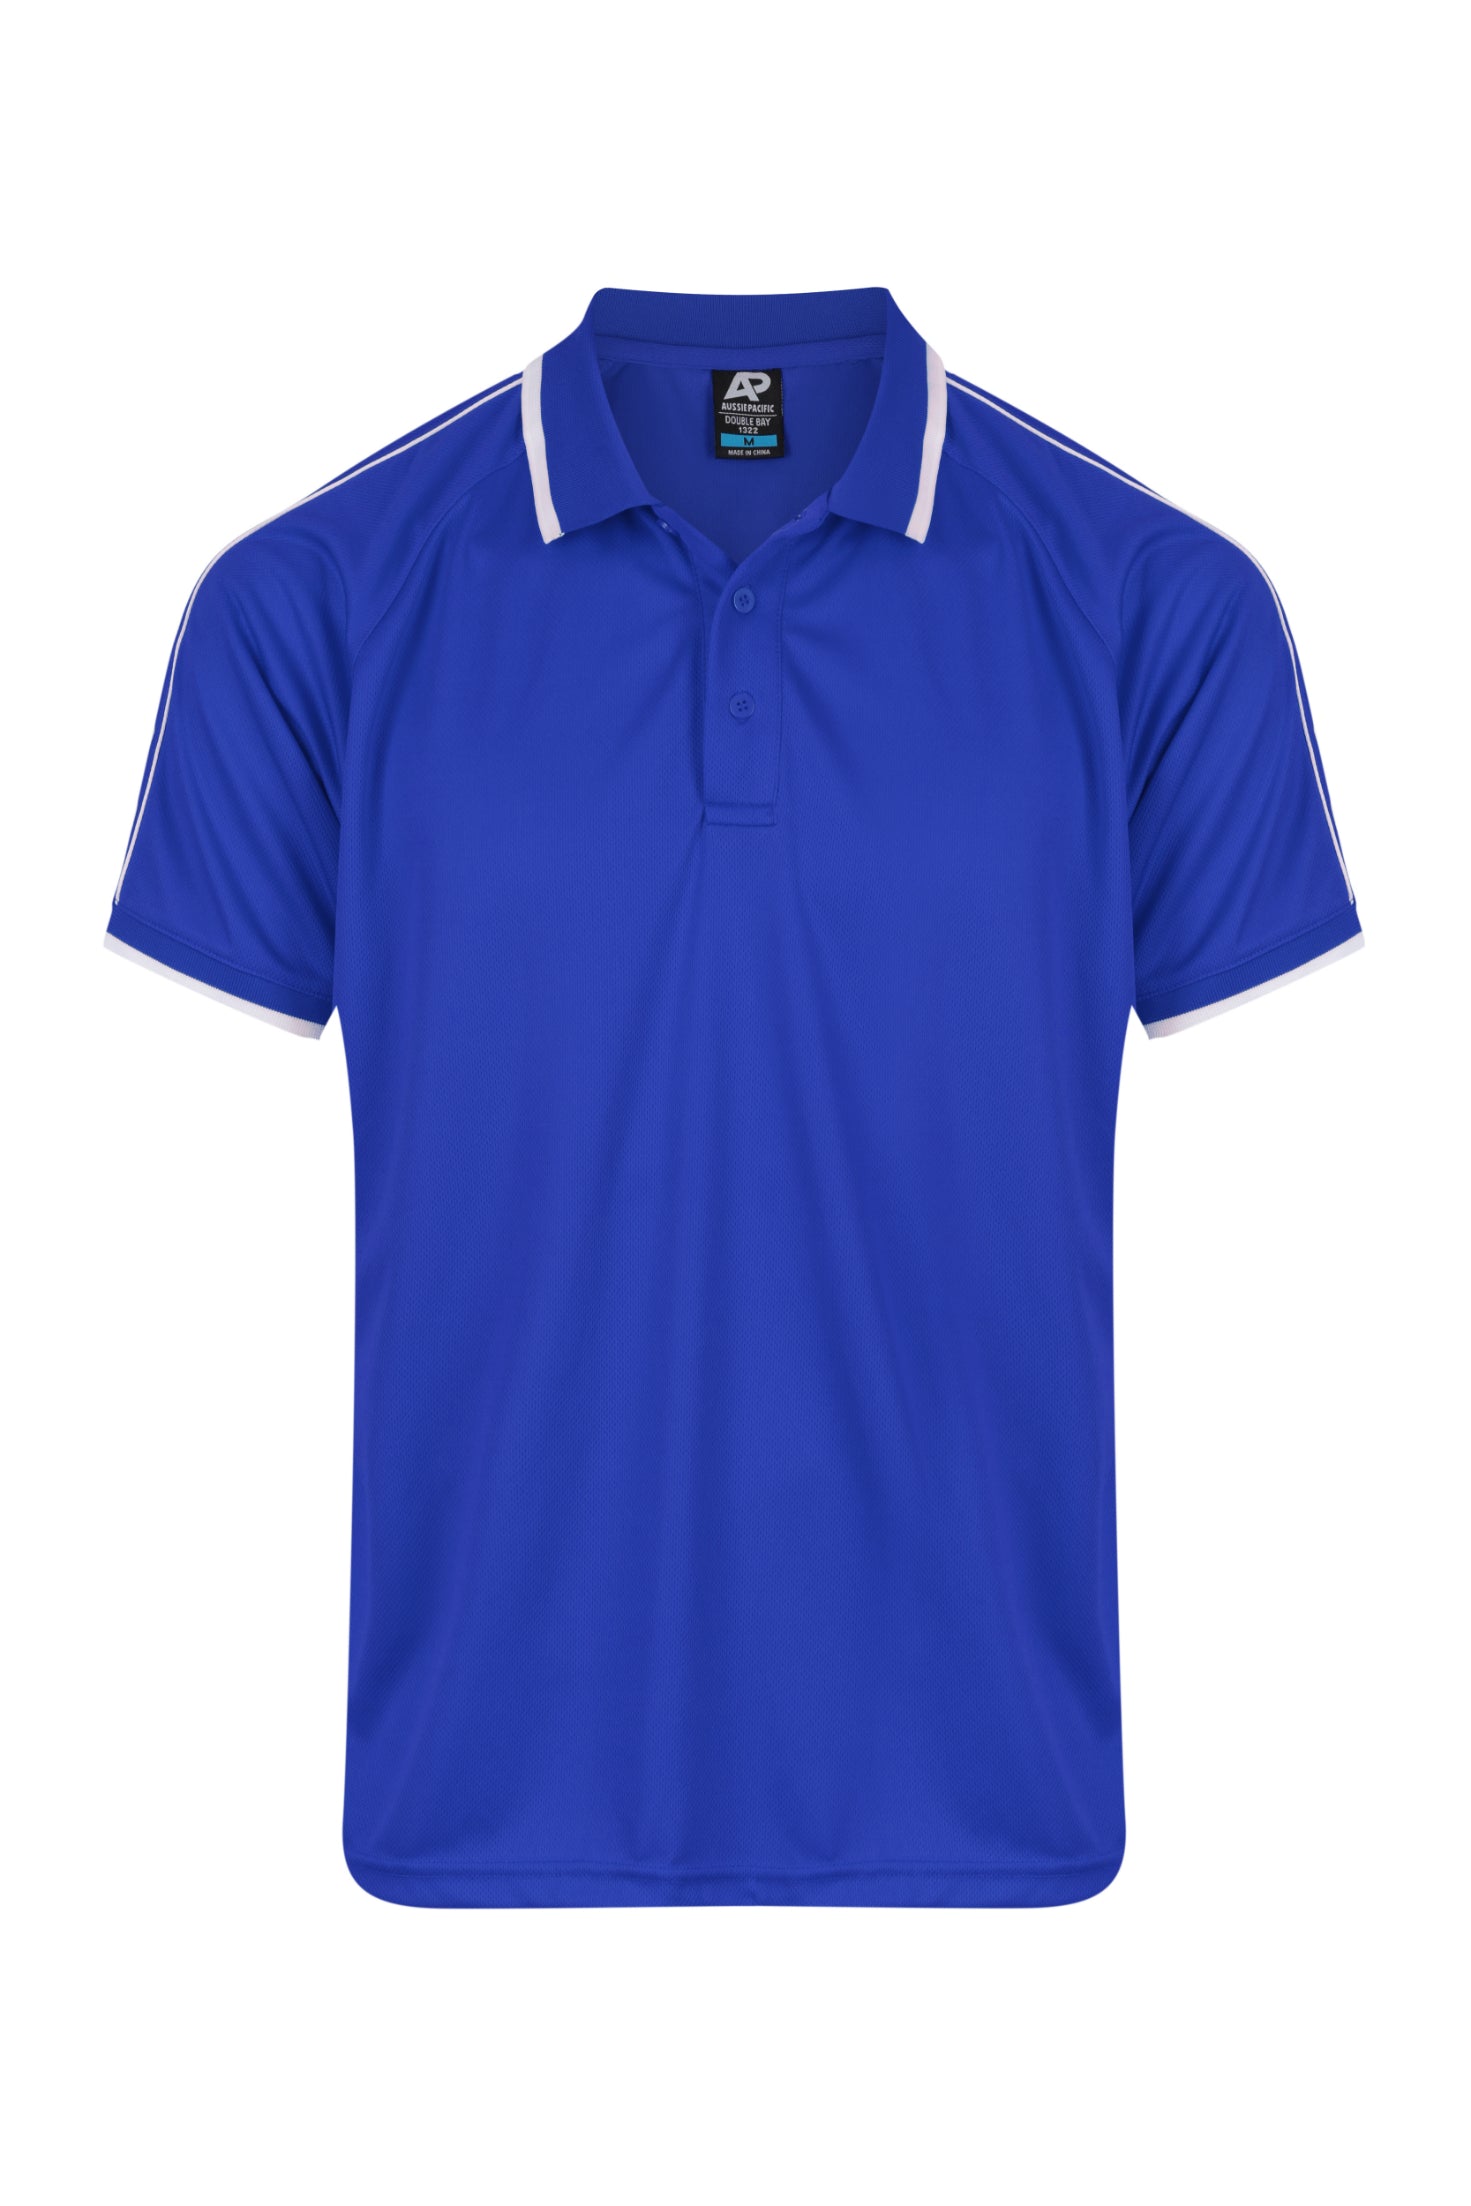 DOUBLE BAY MENS POLOS - 1322-Aussie Pacific-7